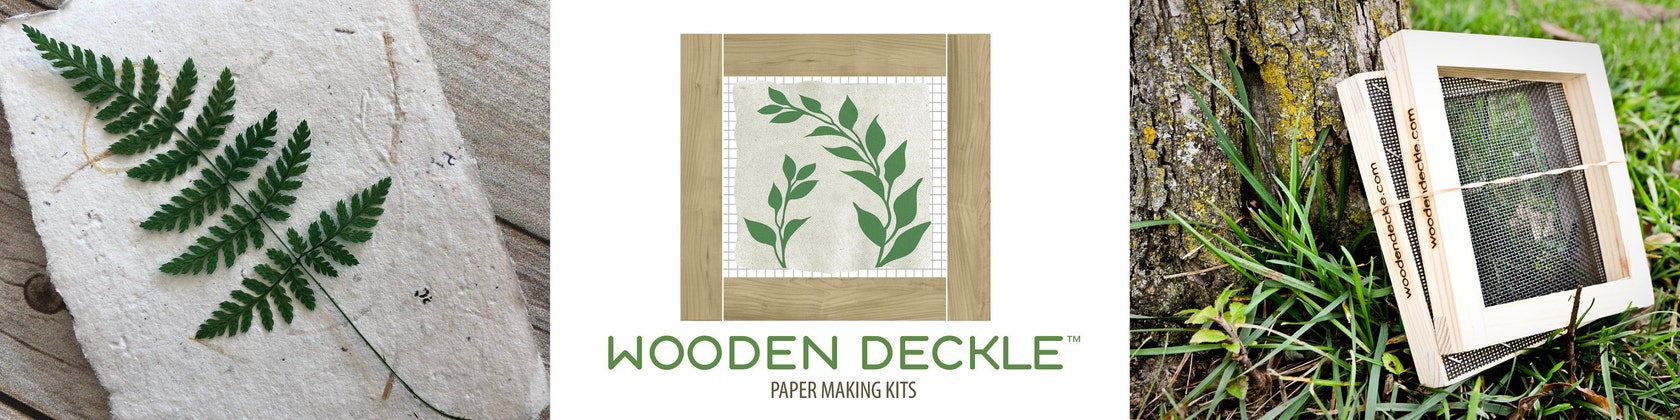 Papermaking Kits, Outdoor Learning, Handmade Bookmark, Recycled Paper,  Montessori Materials, Sustainable Gifts 